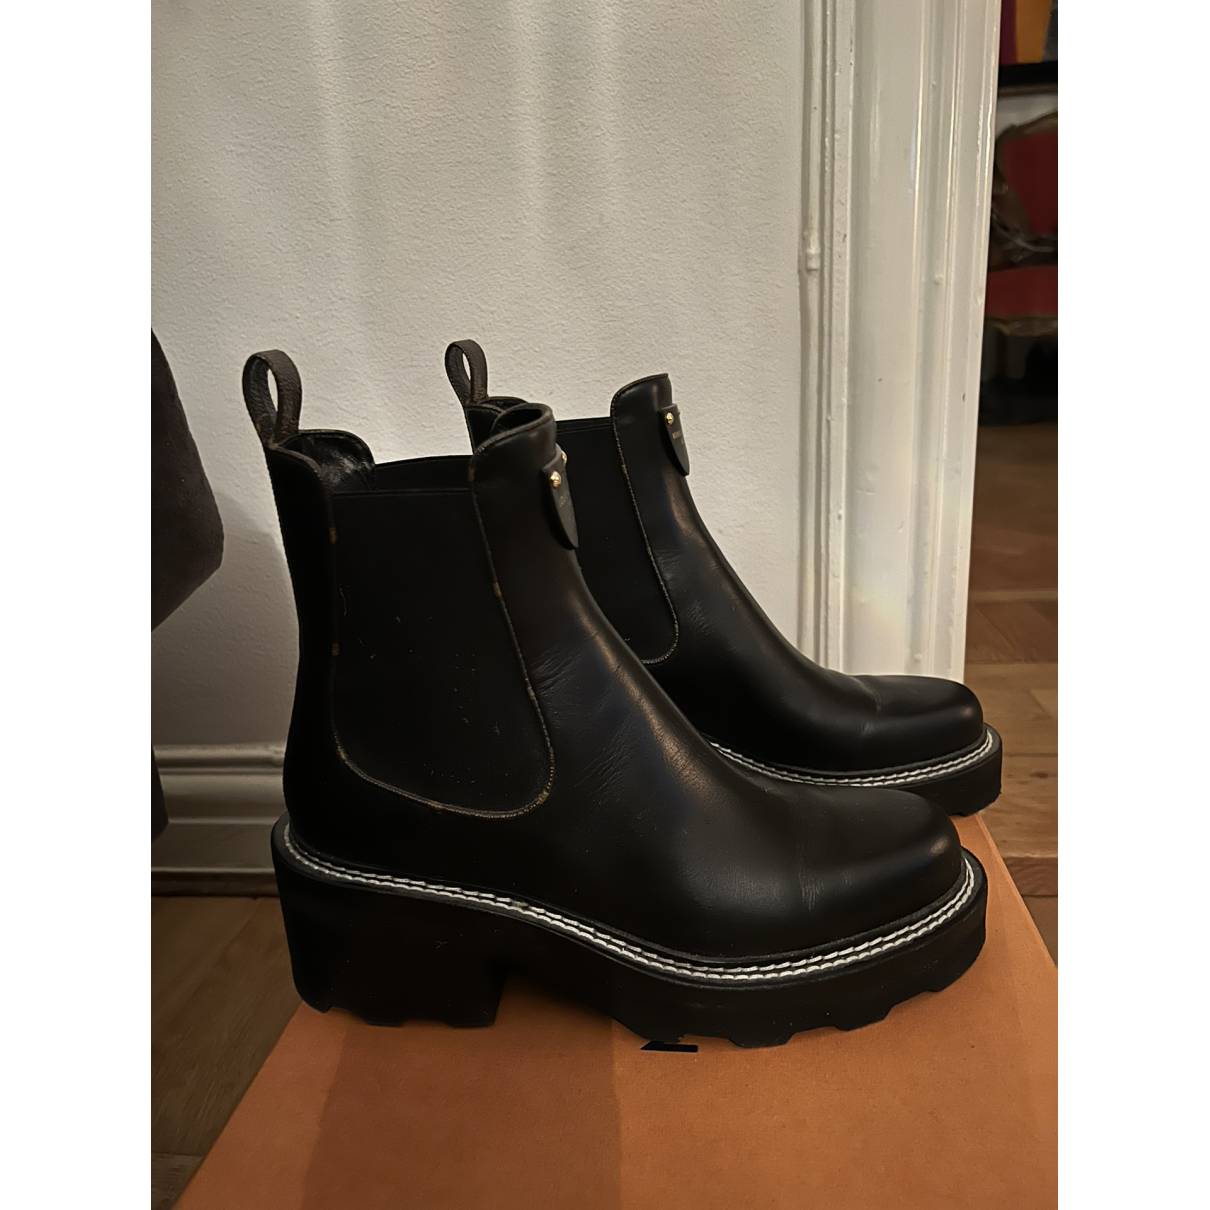 Louis Vuitton Beaubourg Ankle Boots Size 101